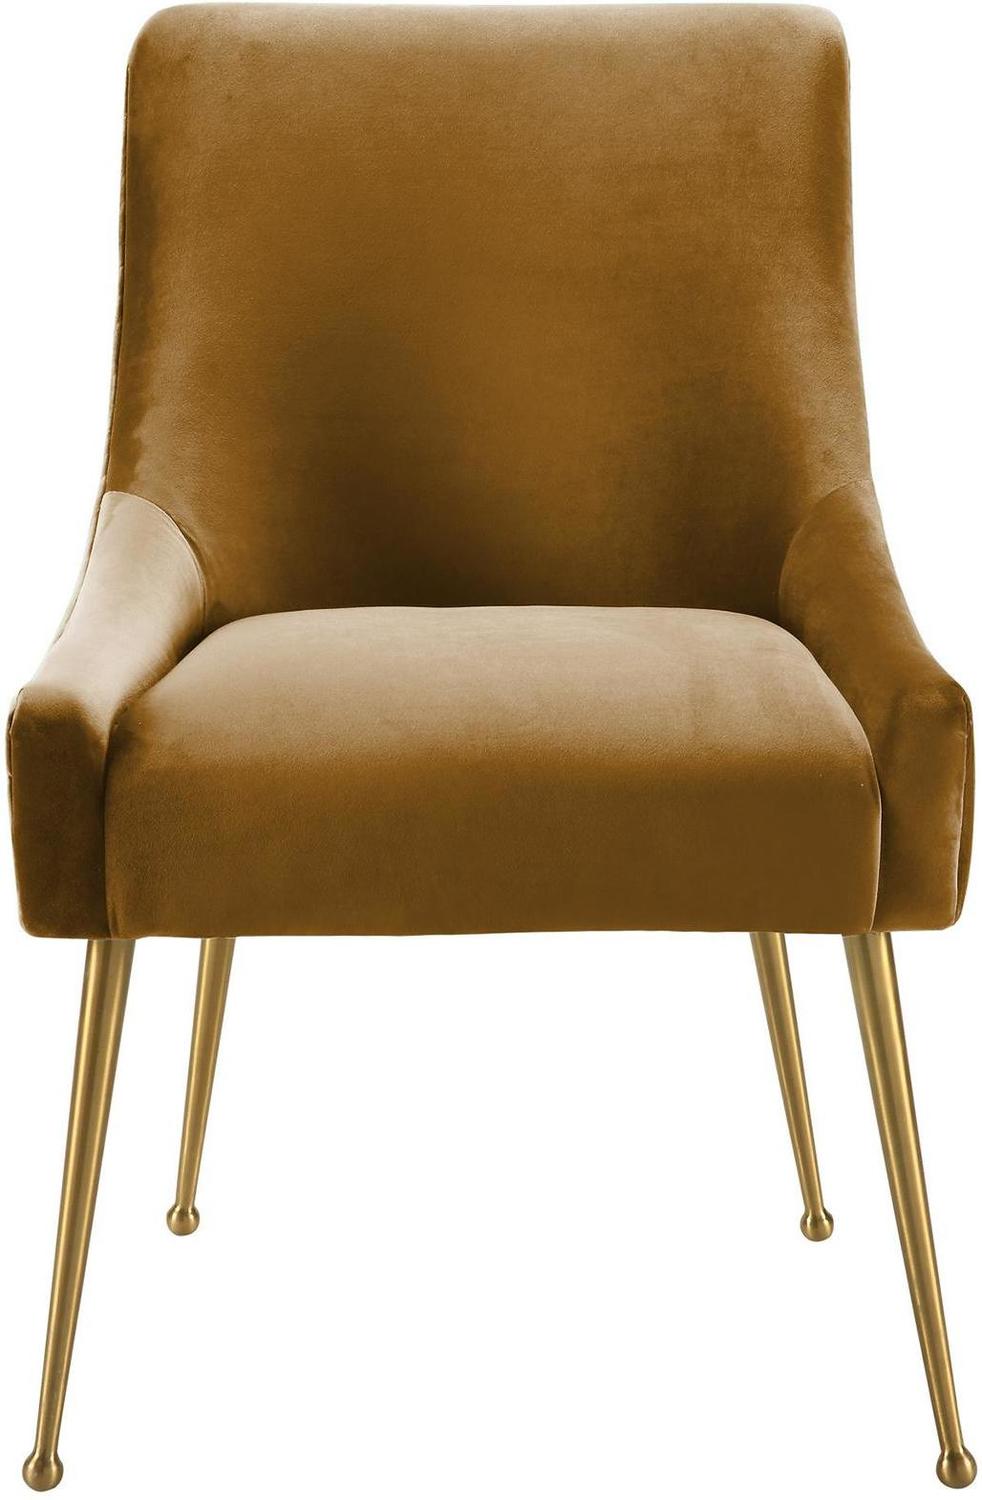 julia wingback chair Contemporary Design Furniture Dining Chairs Chairs Cognac